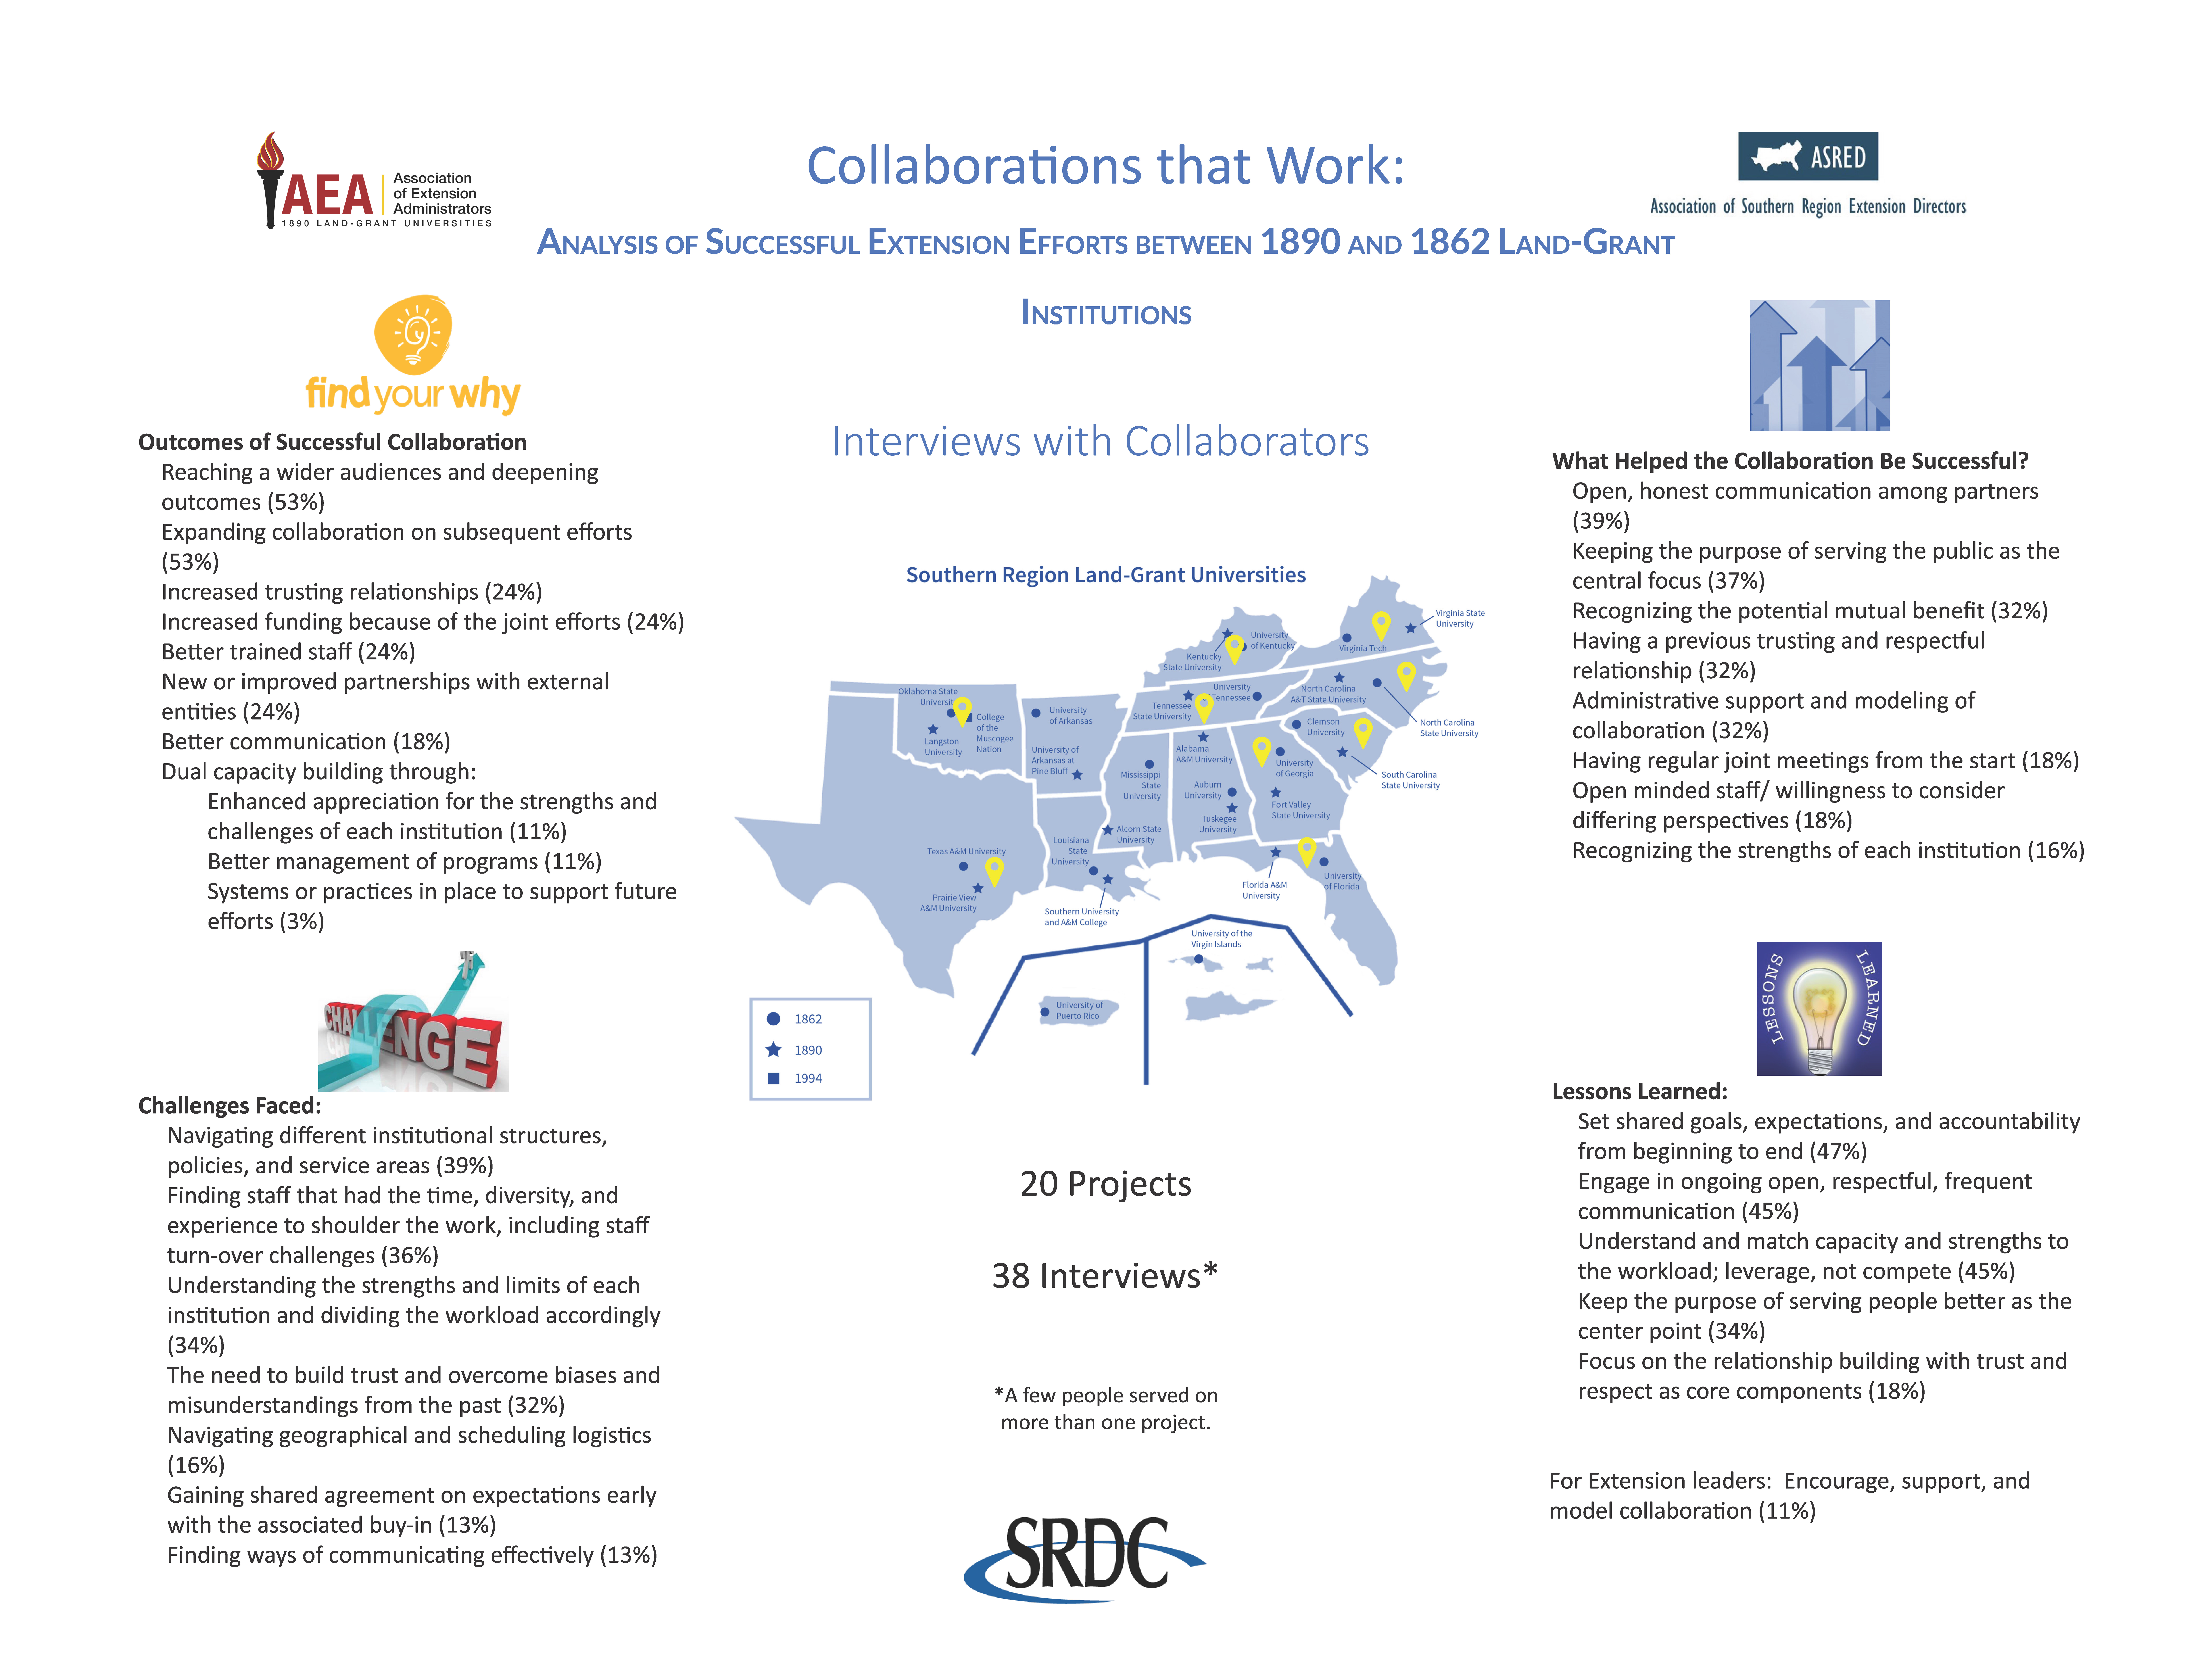 Poster for the Project Collaborations that Work